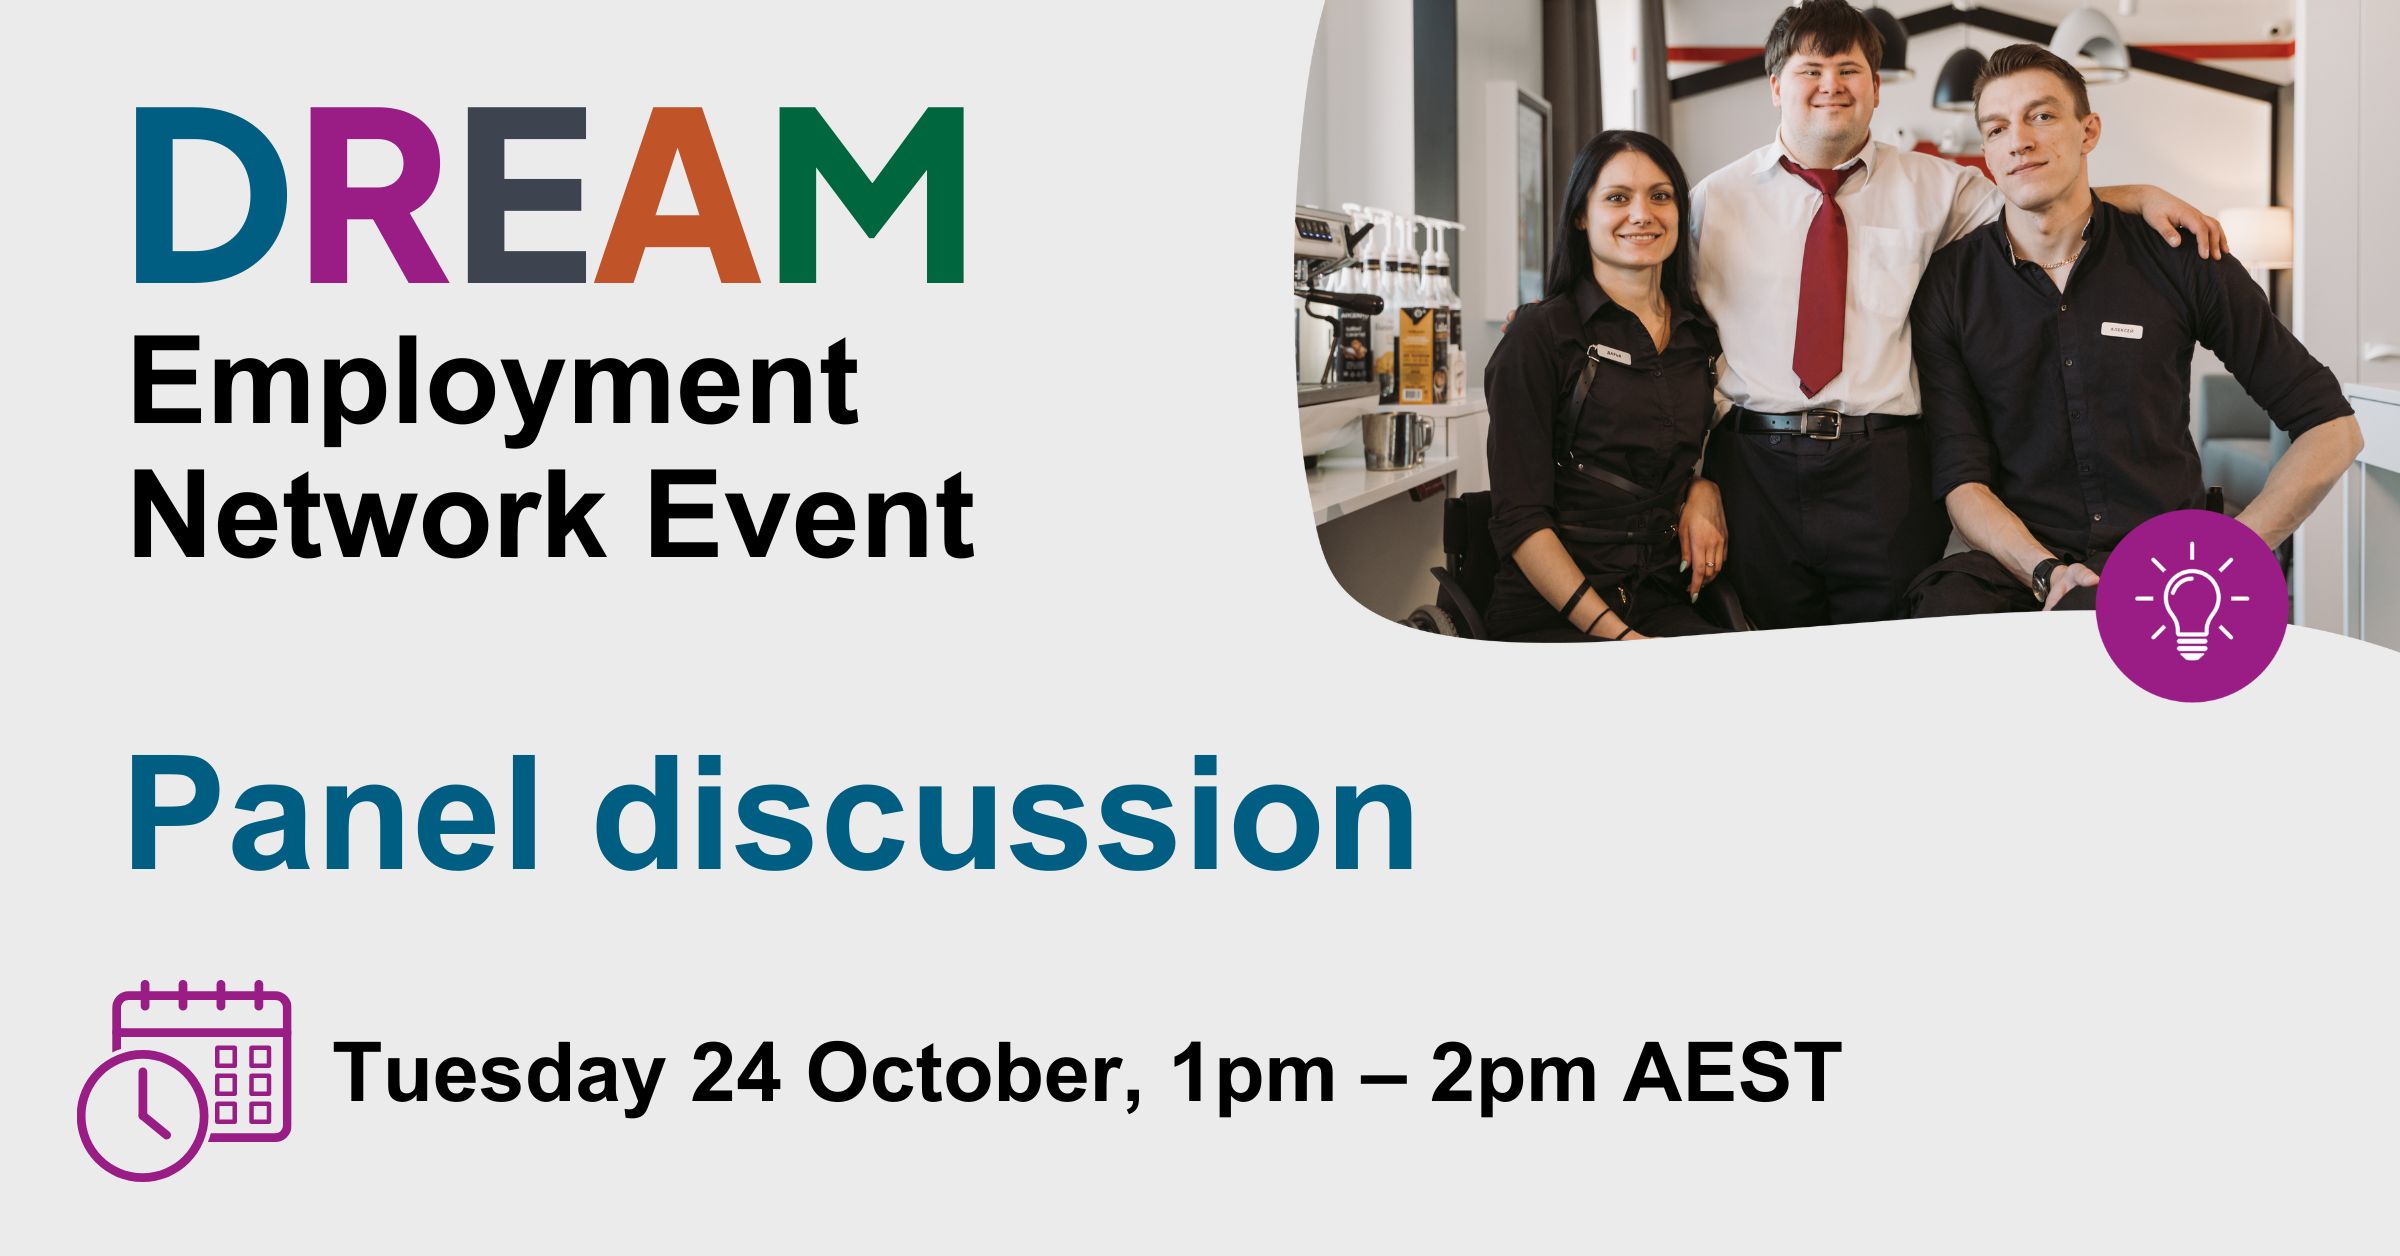 Text reads: "Dream employment network event. Panel discussion. Tuesday October 24, 1-2pm AEST." In the top right corner is a photograph of a young man and woman using manual wheelchairs and a young man with down syndrome with his hand around their shoulders. They might be behind the counter in a cafe and they are all smiling politely.